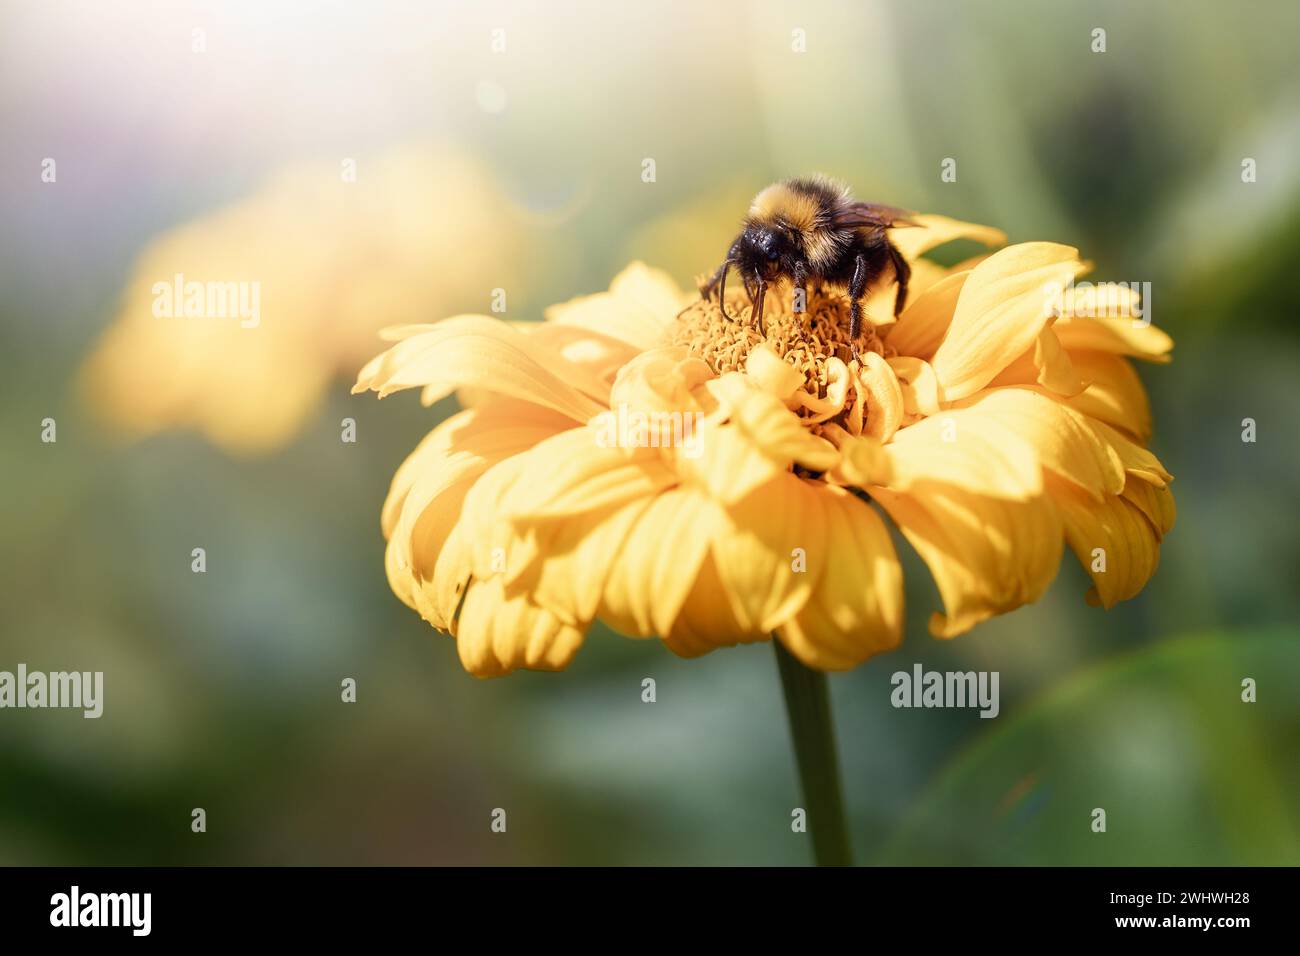 The shaggy bumblebee sits on a yellow flower. Bumblebee sucking nectar. Stock Photo